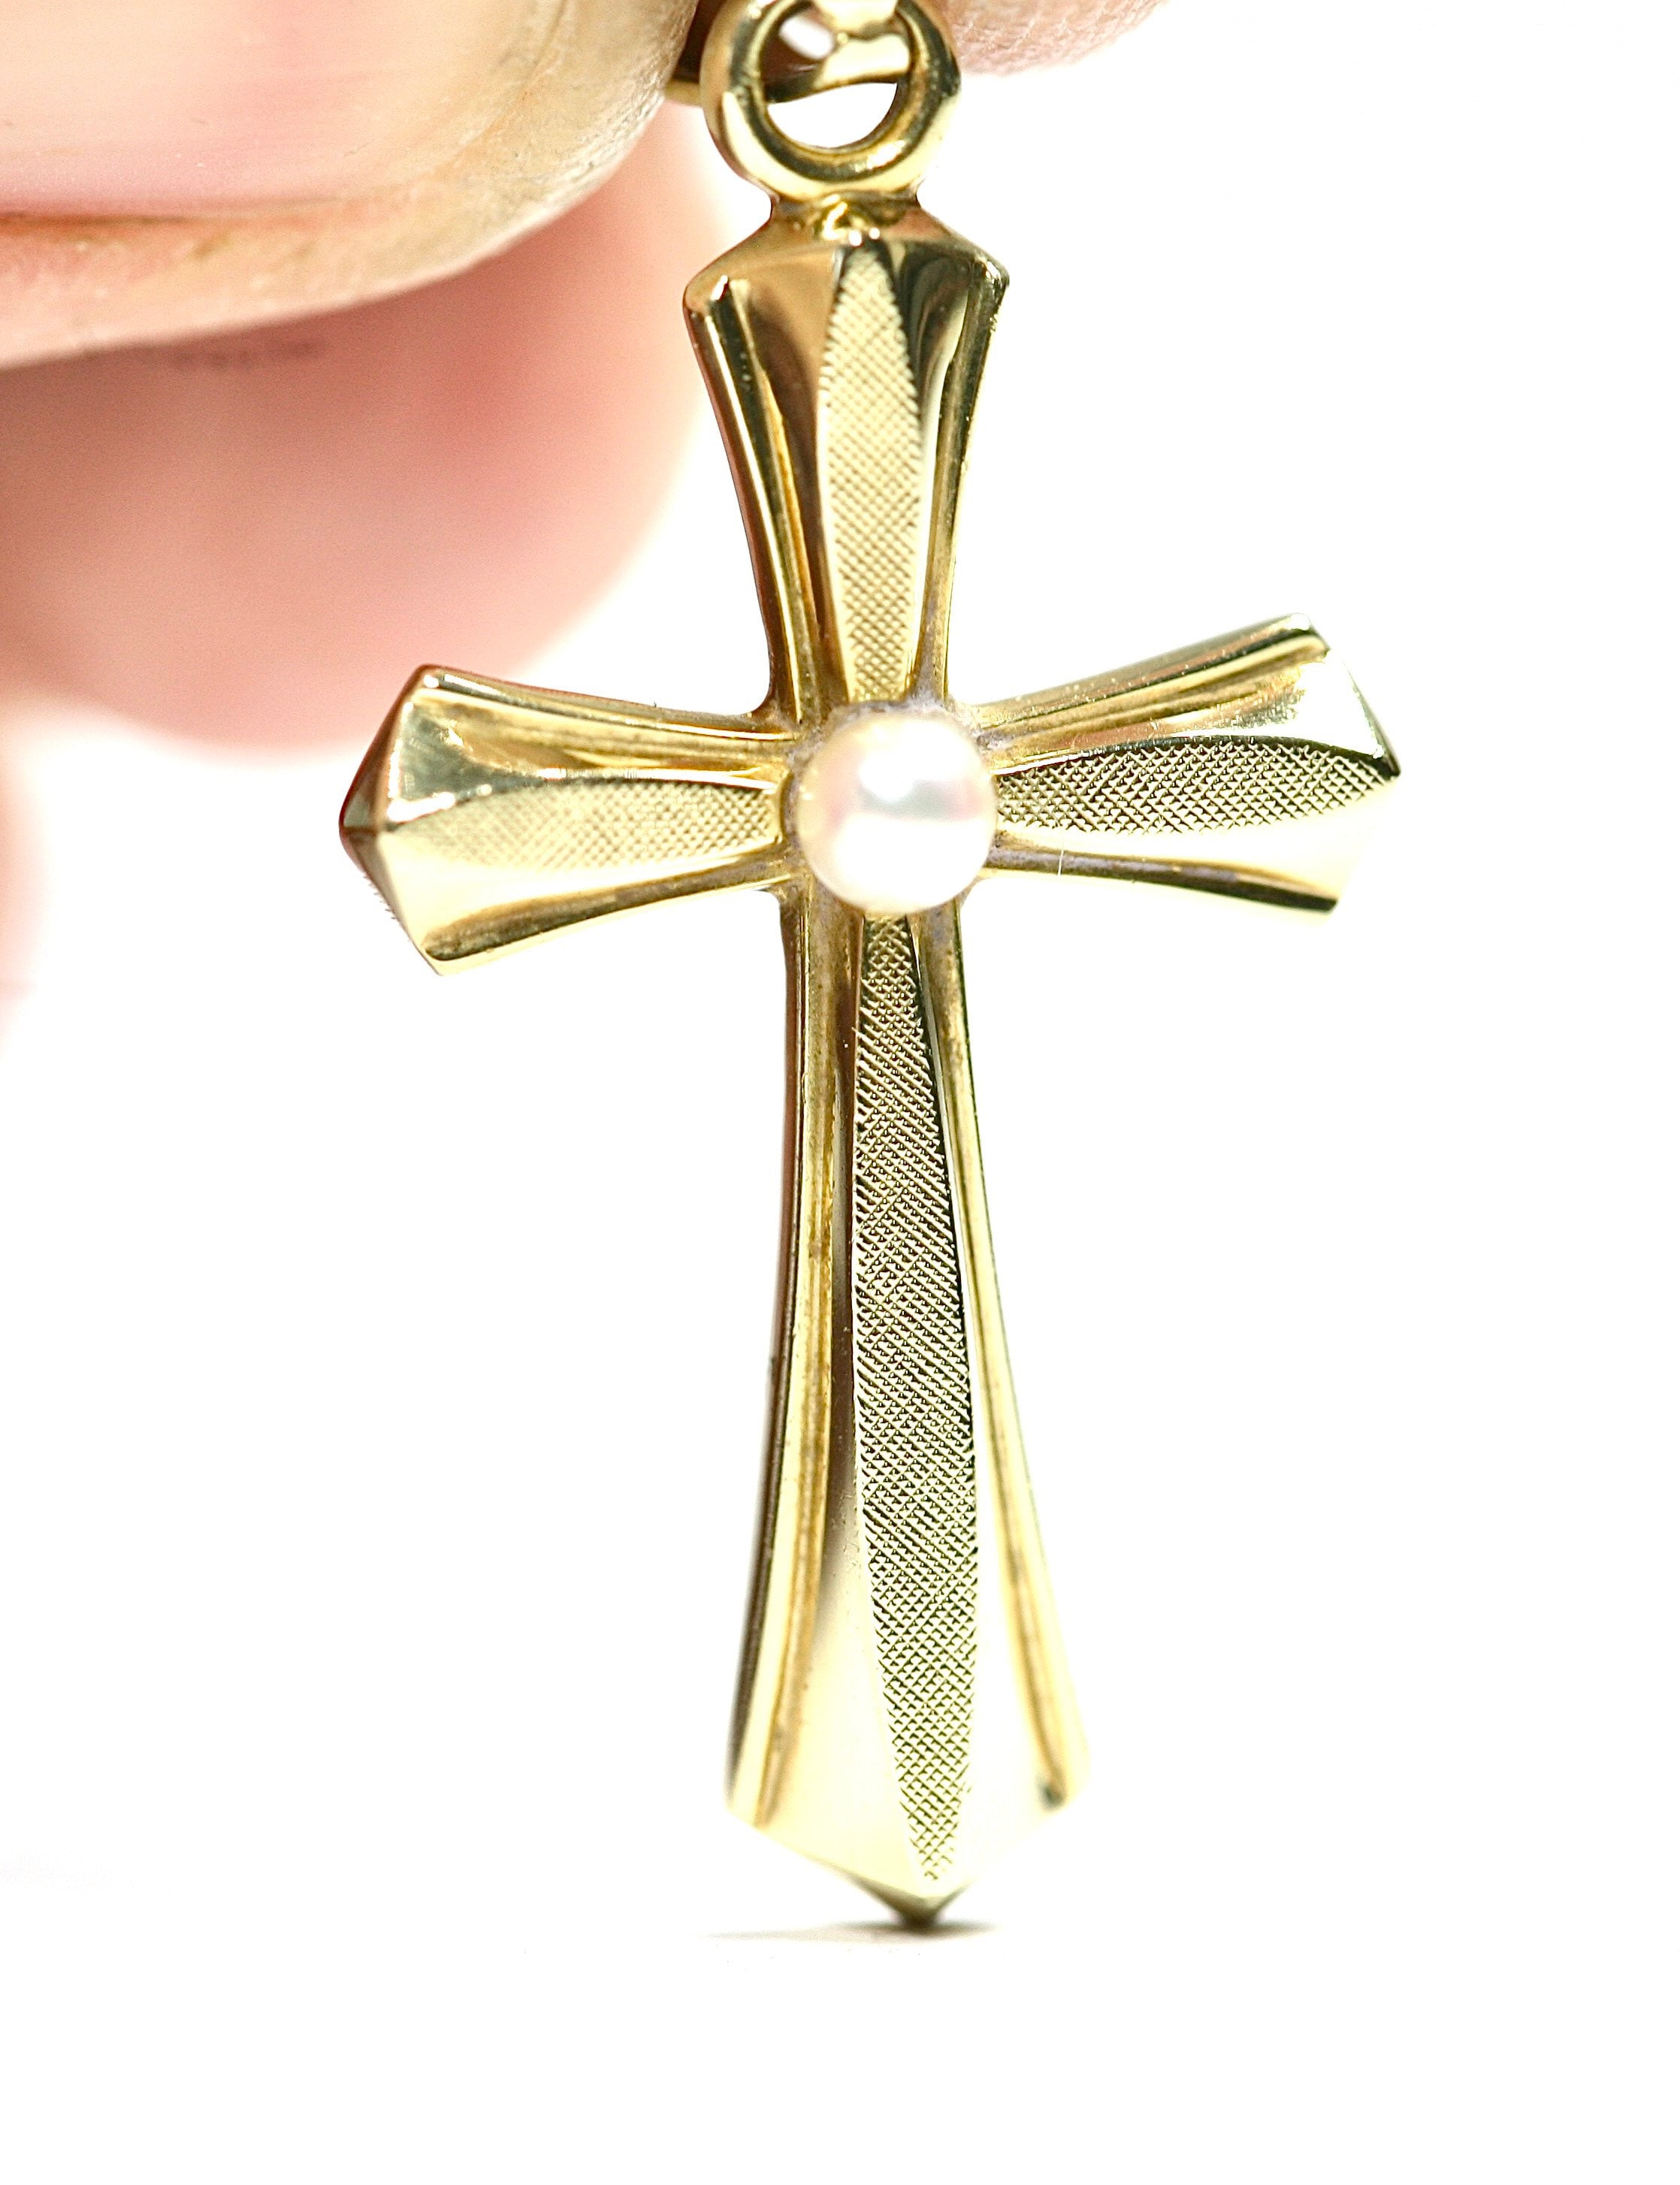 Superb vintage 14k yellow gold Cross pendant with cultured pearl ...